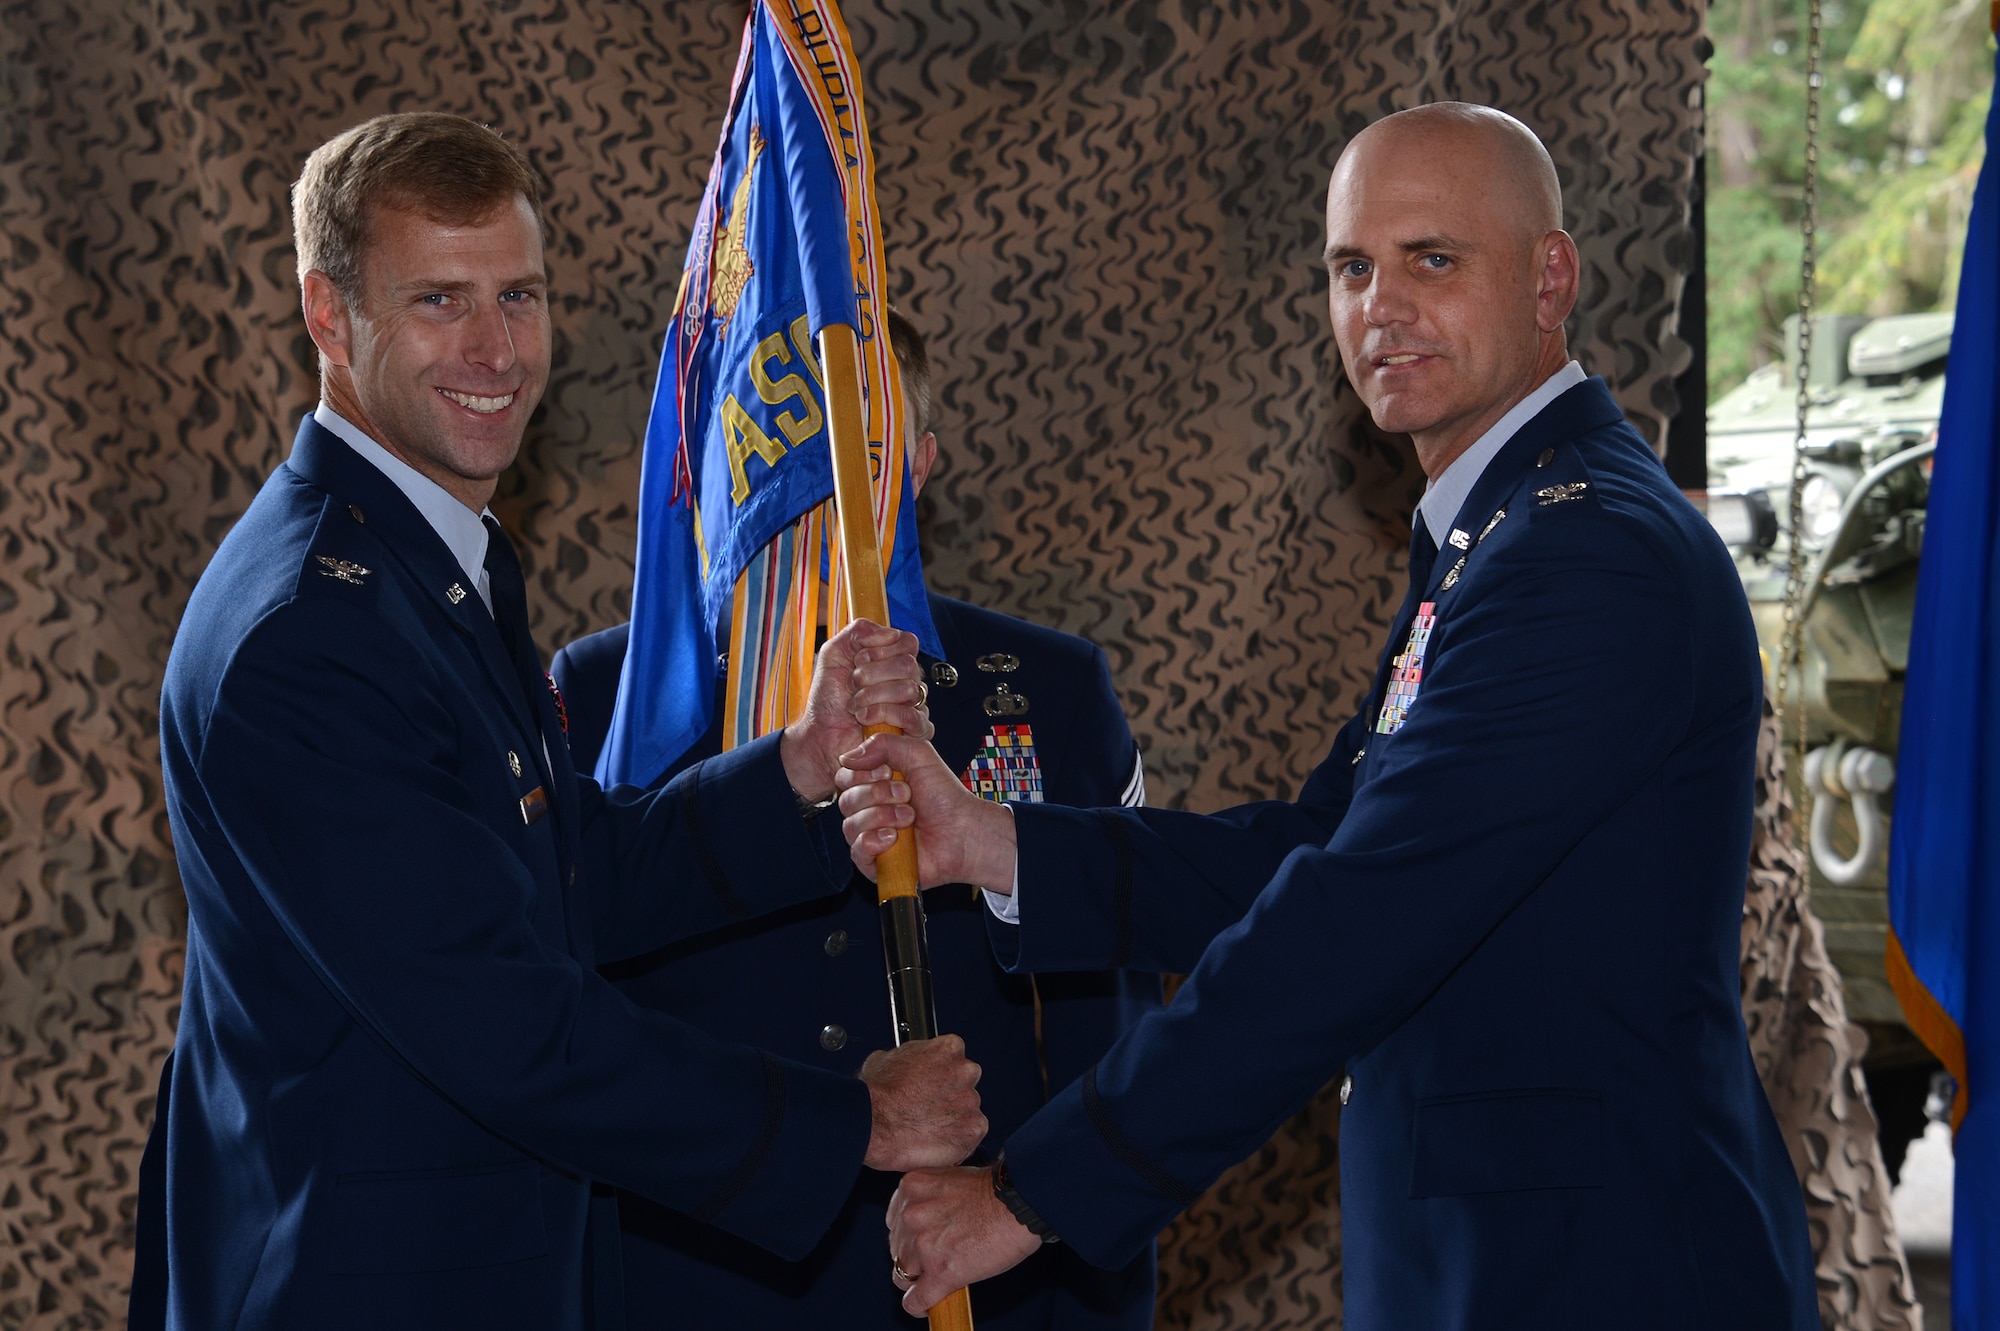 Col. David Mineau (left), 354th Fighter Wing commander, presents the 1st Air Support Operations Group guidon to Col. Jon Berry, 1st ASOG commander during a change of command ceremony July 7, 2016, at Joint Base Lewis-McChord, Wash. Berry assumed command of the group from the outgoing commander Col. James Bowen. (U.S. Air Force photo/Senior Airman Jacob Jimenez) 